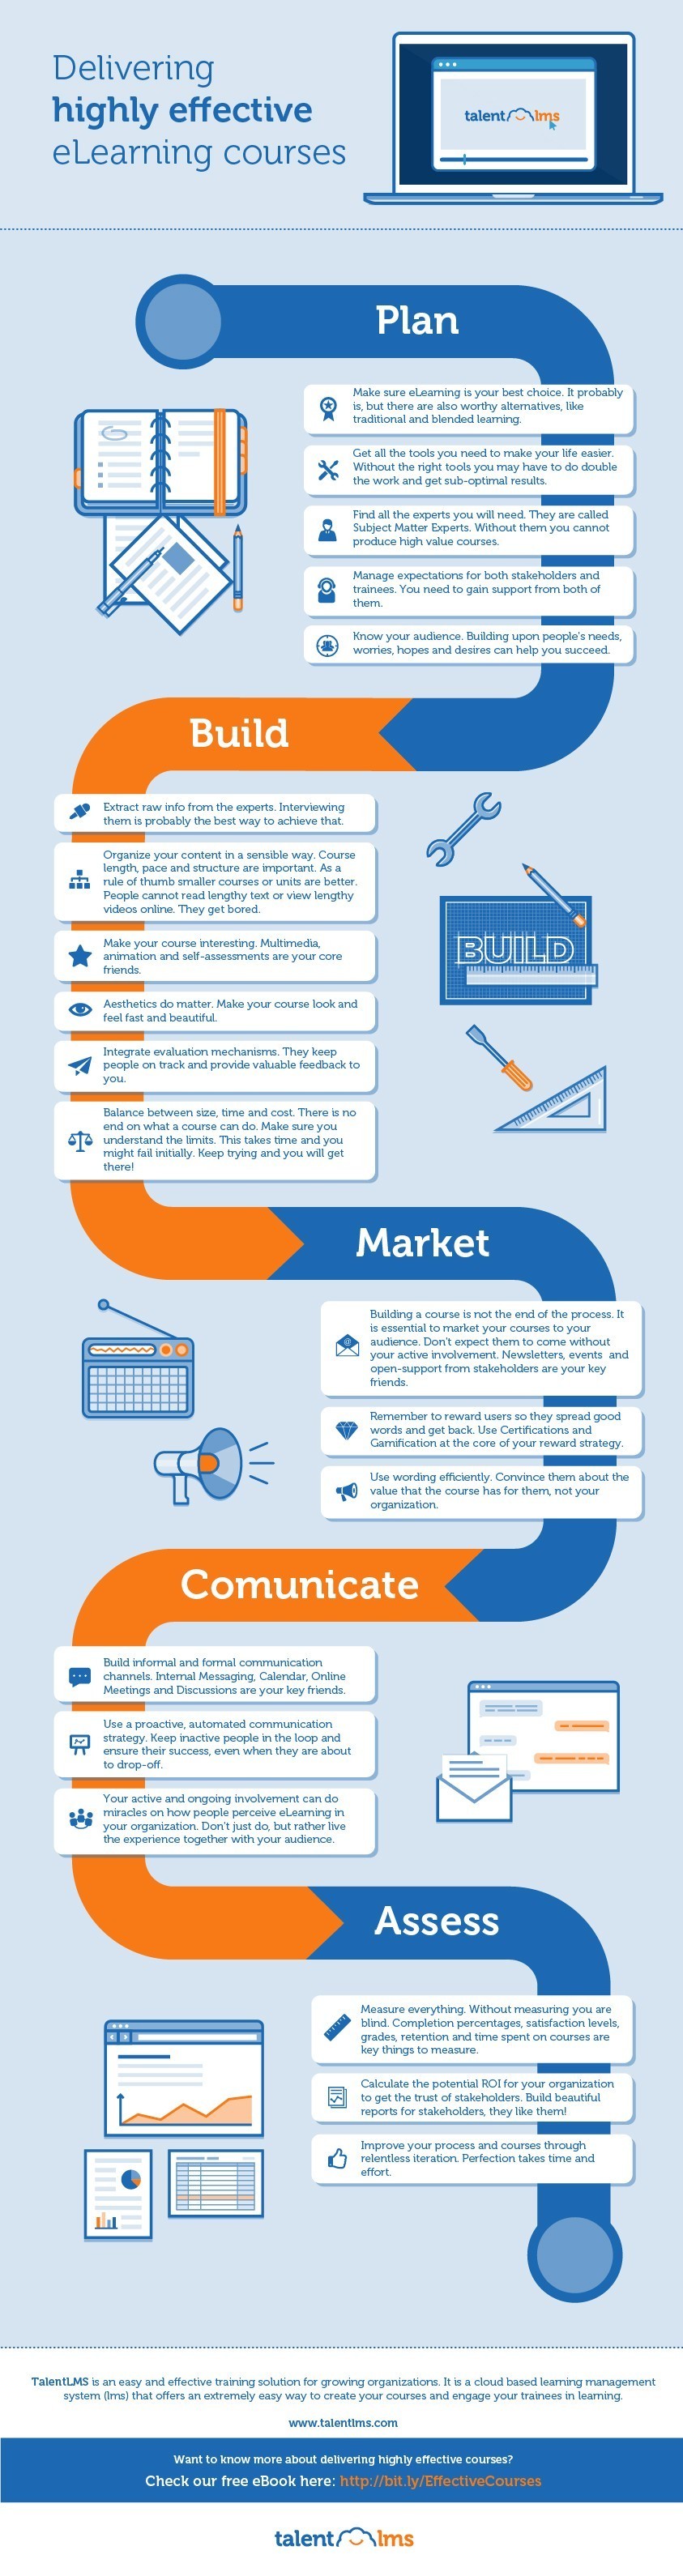 Delivering highly effective eLearning courses - Infographic thumbnail